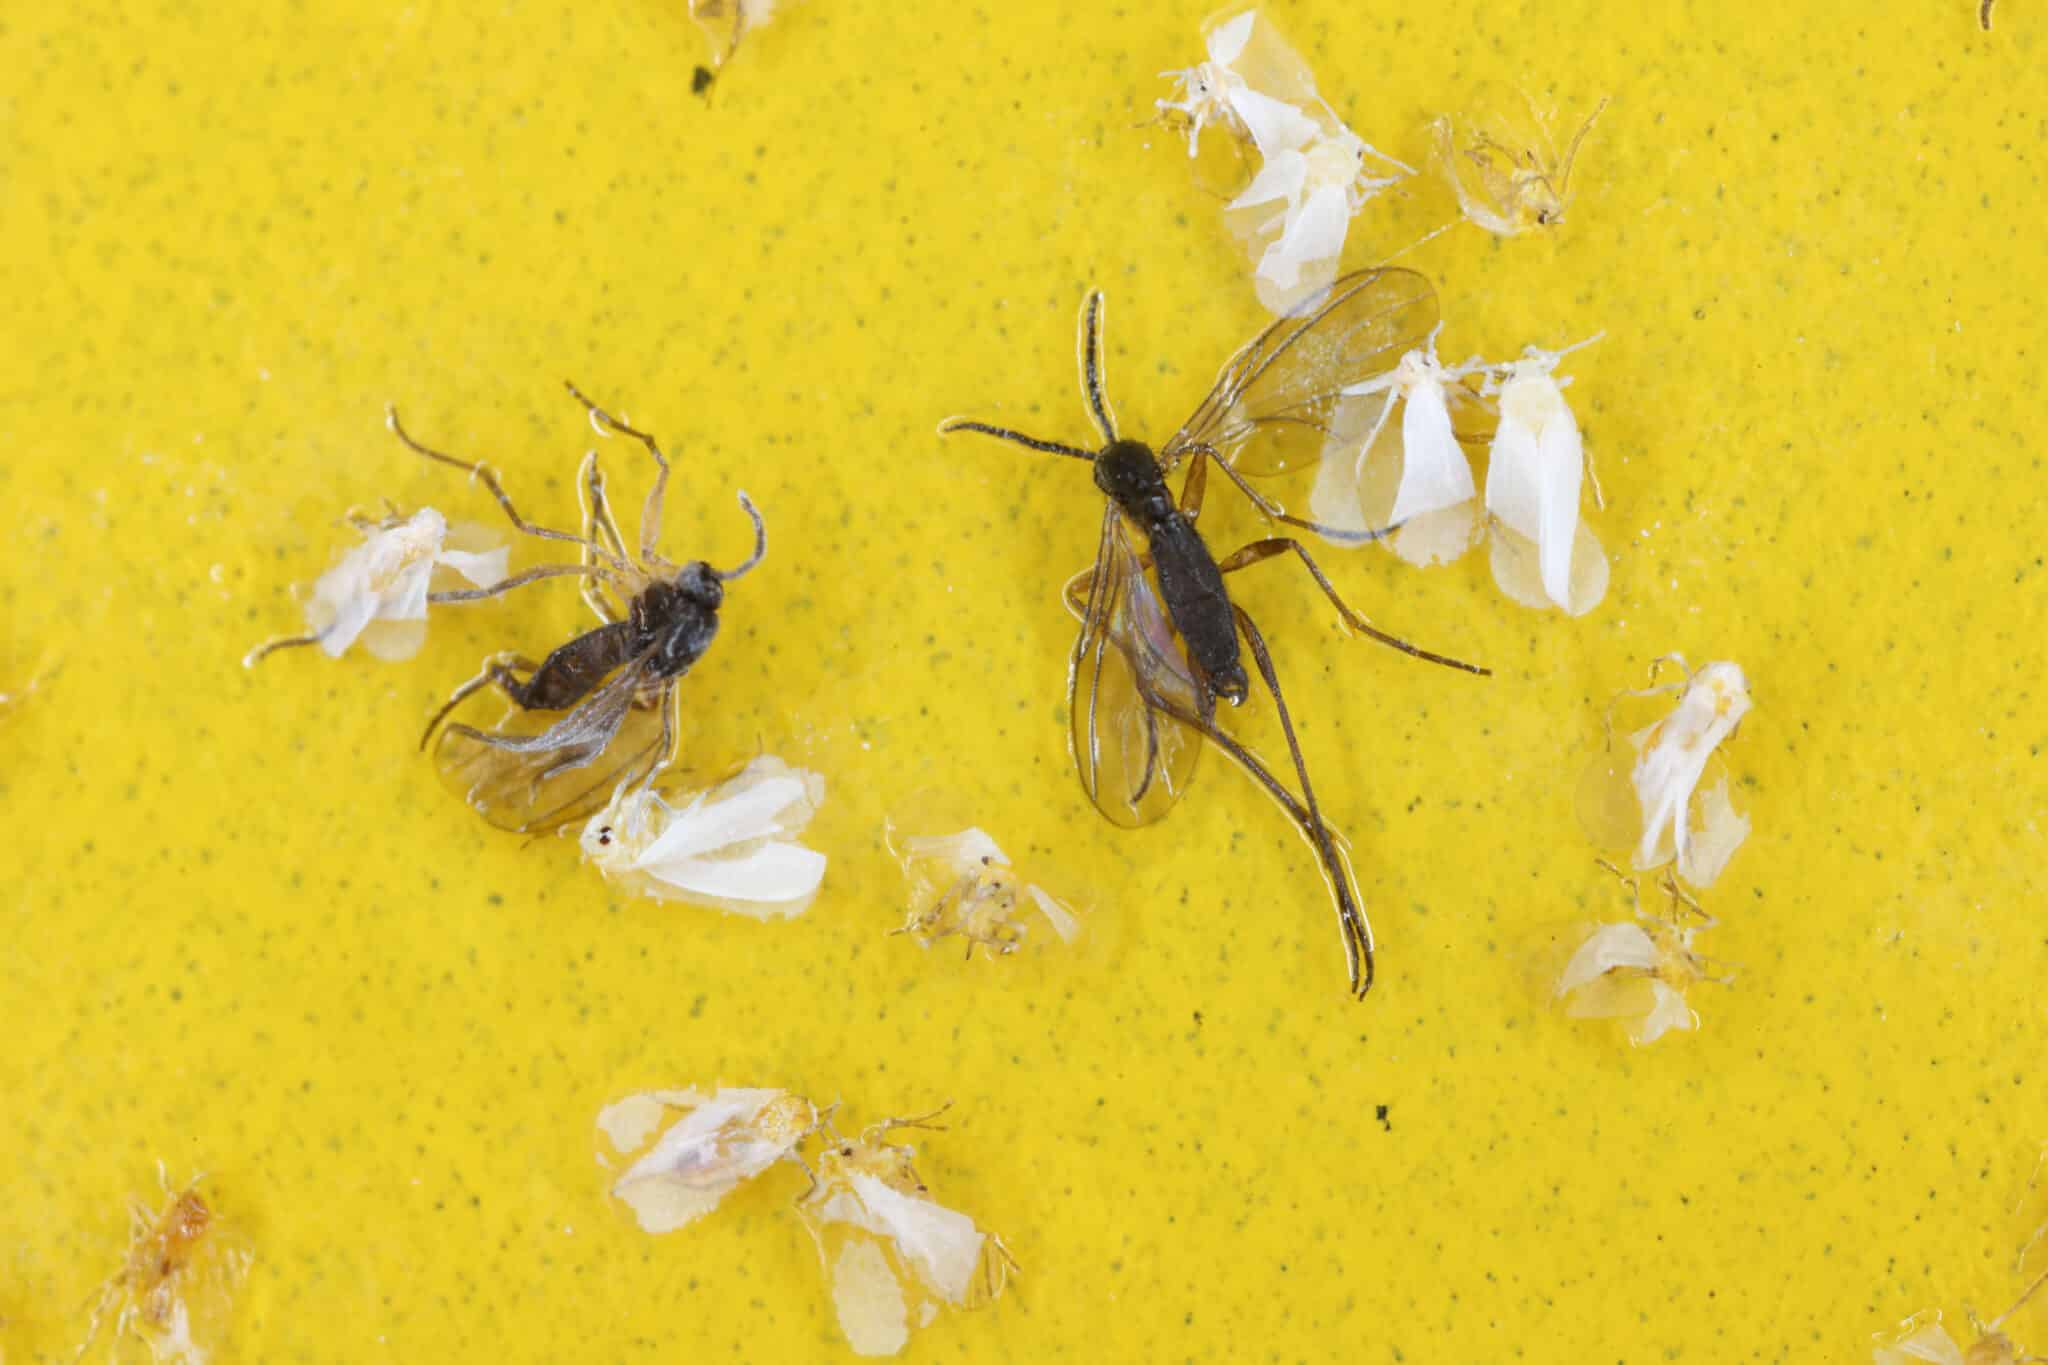 https://www.extermpro.com/wp-content/uploads/2022/09/dark-winged-fungus-gnats-and-white-flies-are-stuck-on-a-yellow-sticky-trap-whiteflies-trapped-and-sciaridae-fly-sticky-in-a-trap-stockpack-adobe-stock-scaled.jpg